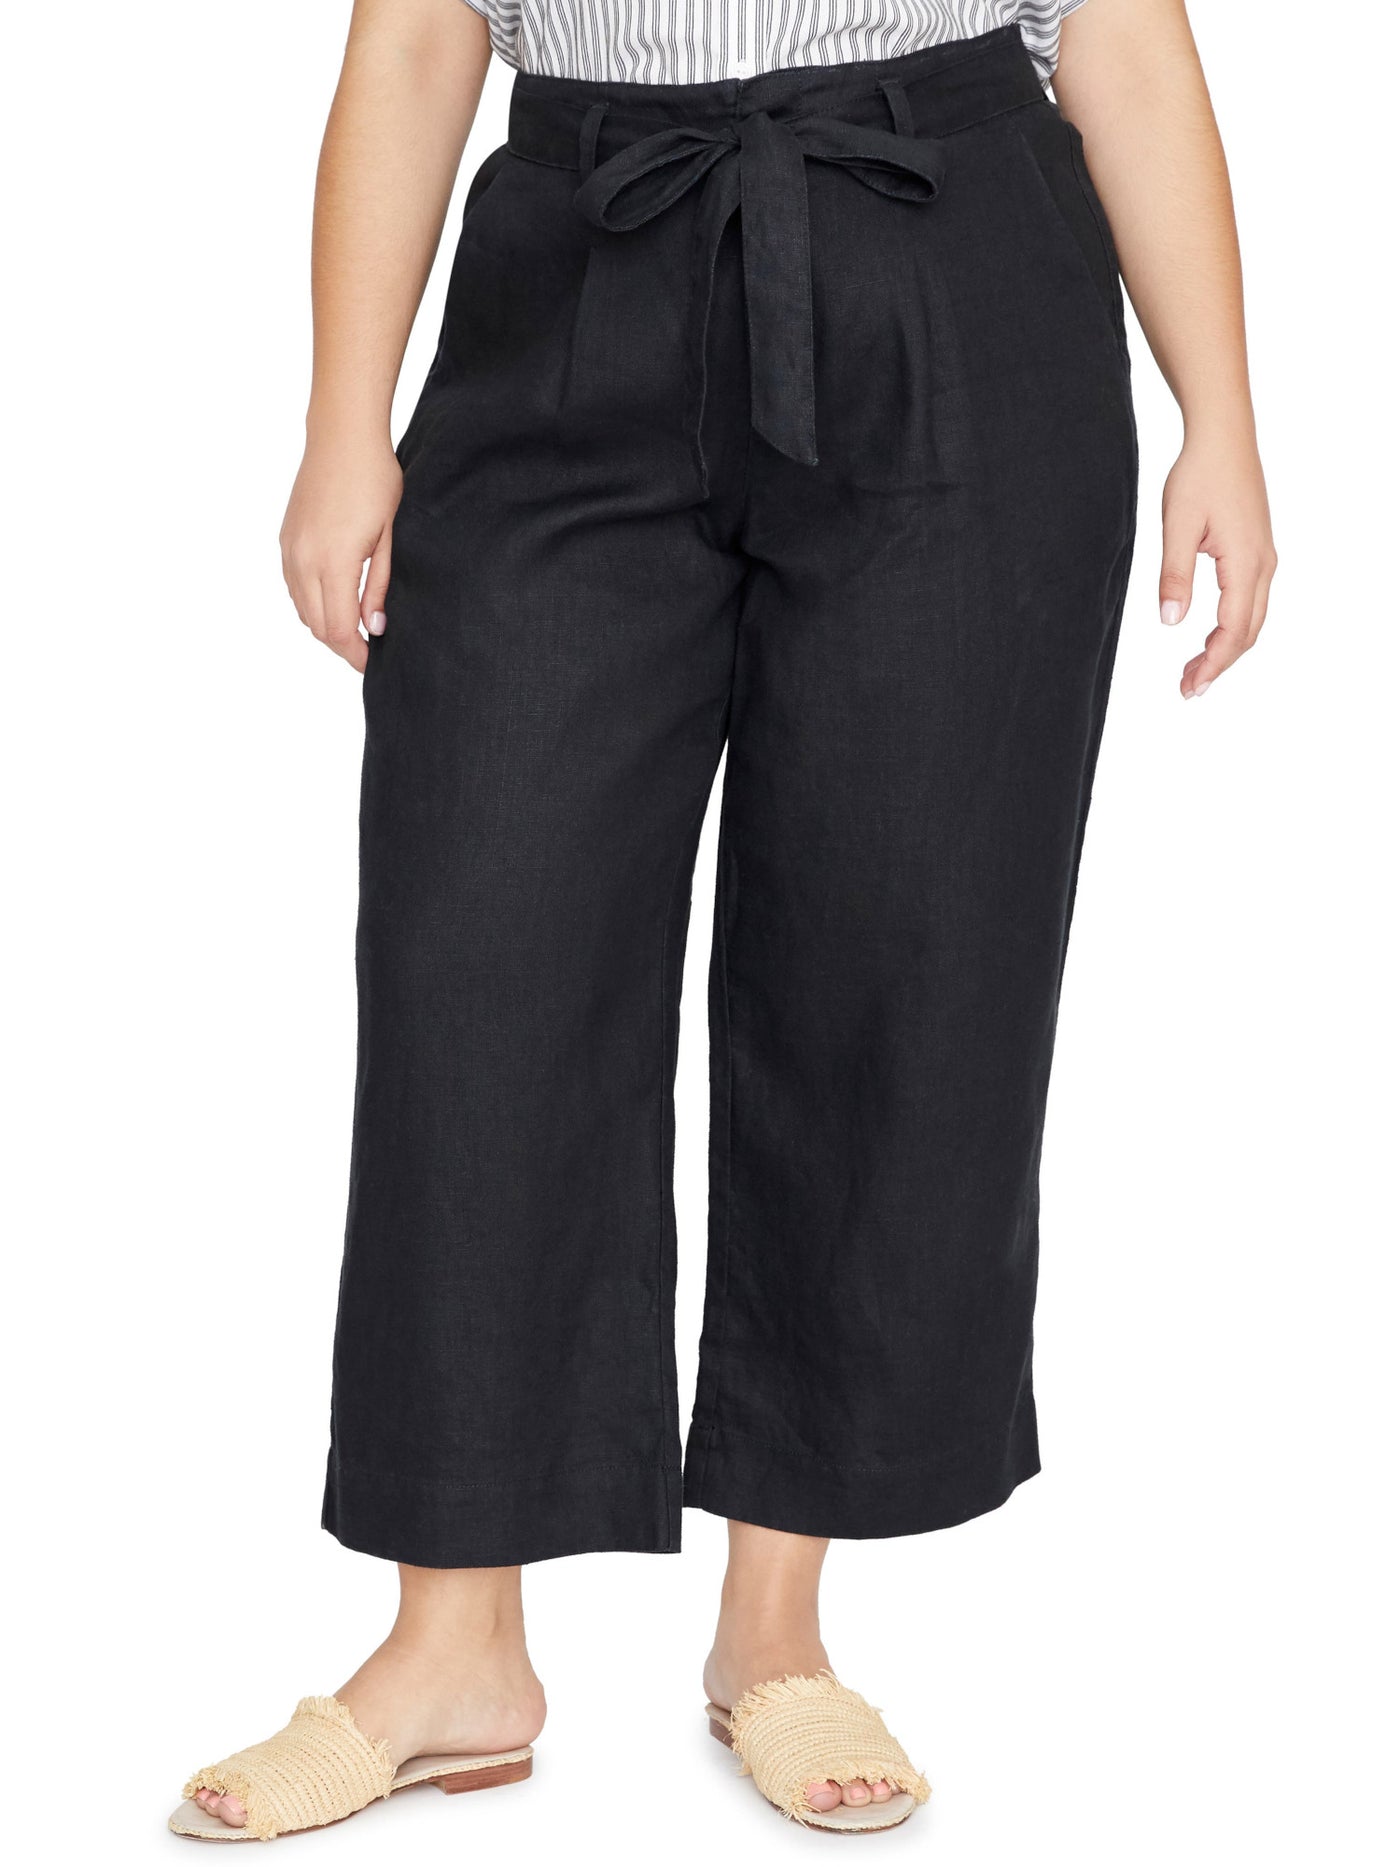 SANCTUARY Womens Black Pocketed Zippered Cropped Tie Belt Pleated Wide Leg Pants Plus 14W